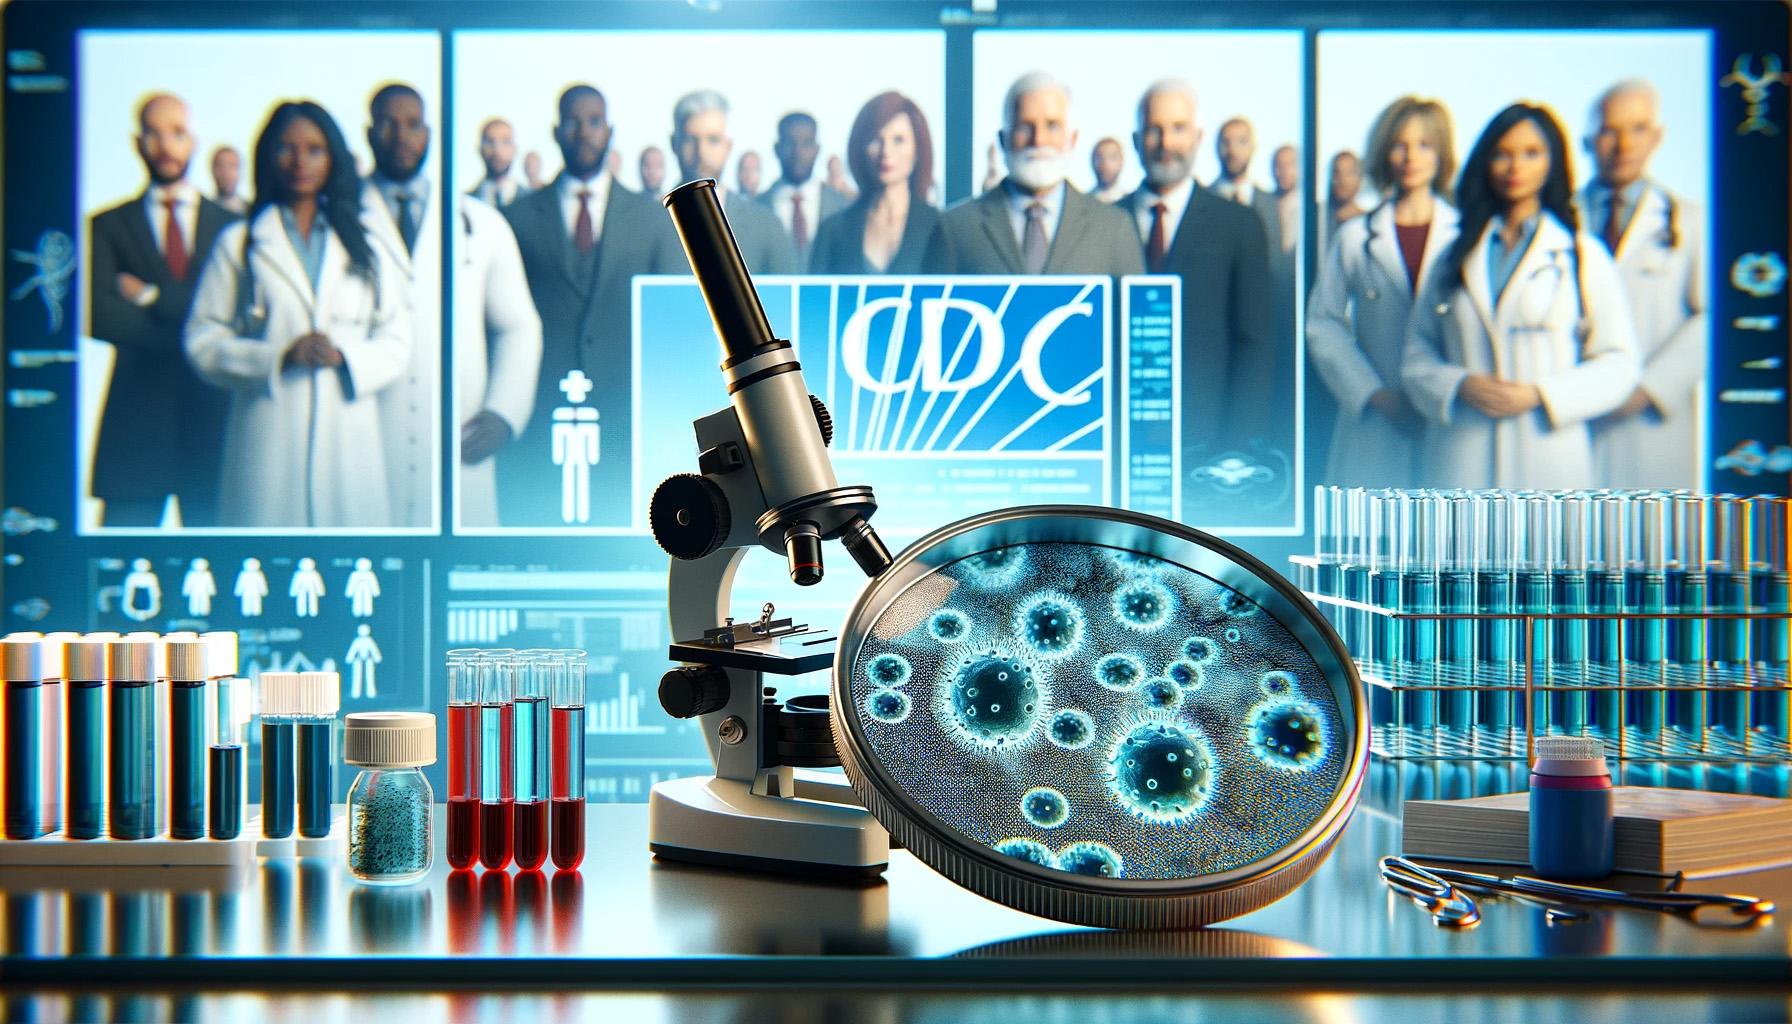 CDC or or disease news graphic